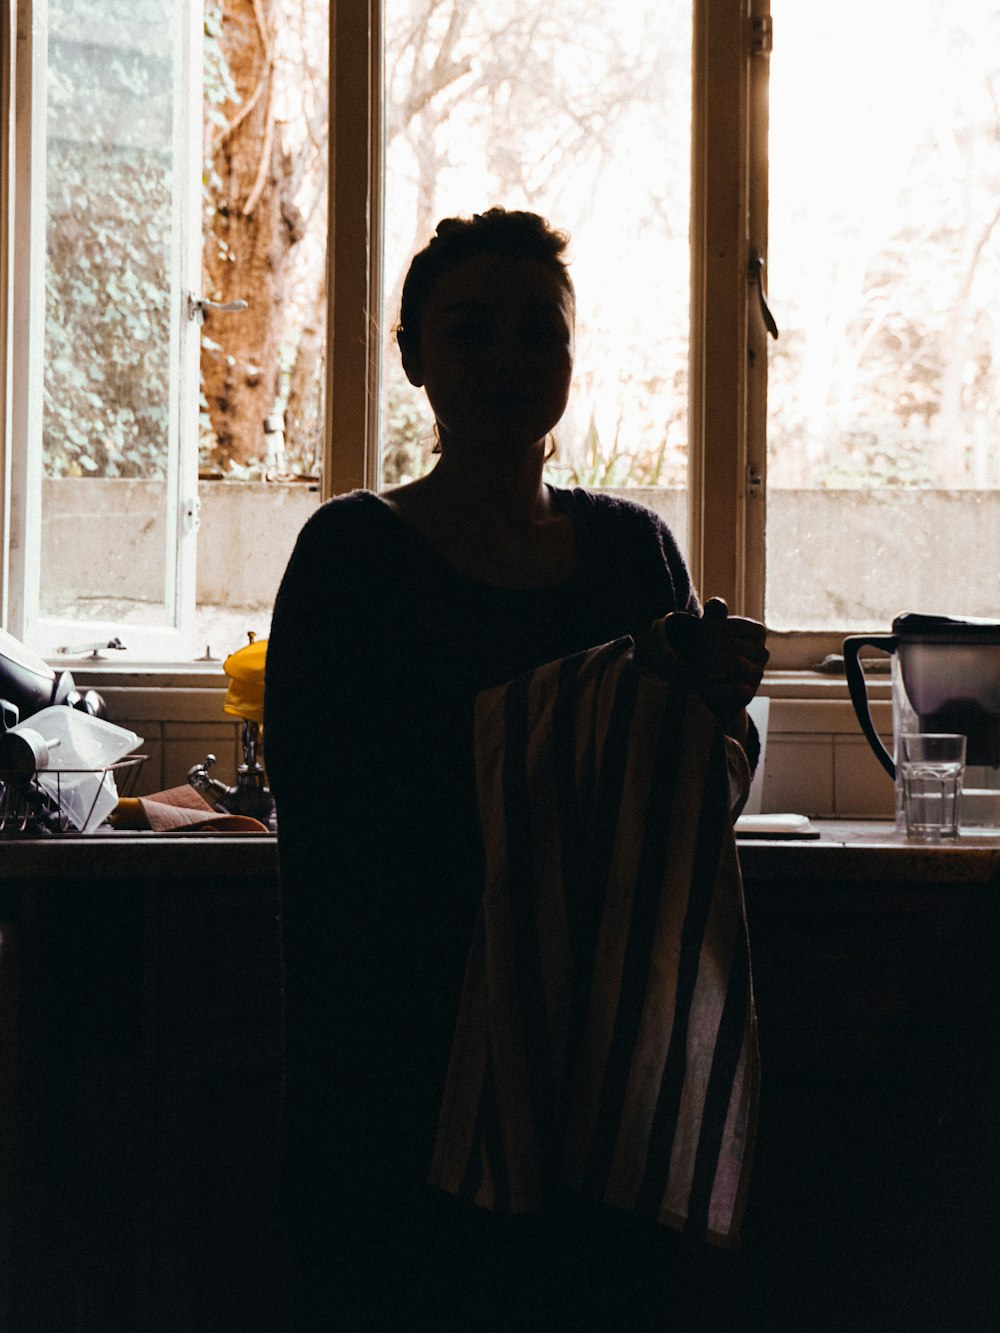 a woman standing in a kitchen holding a towel